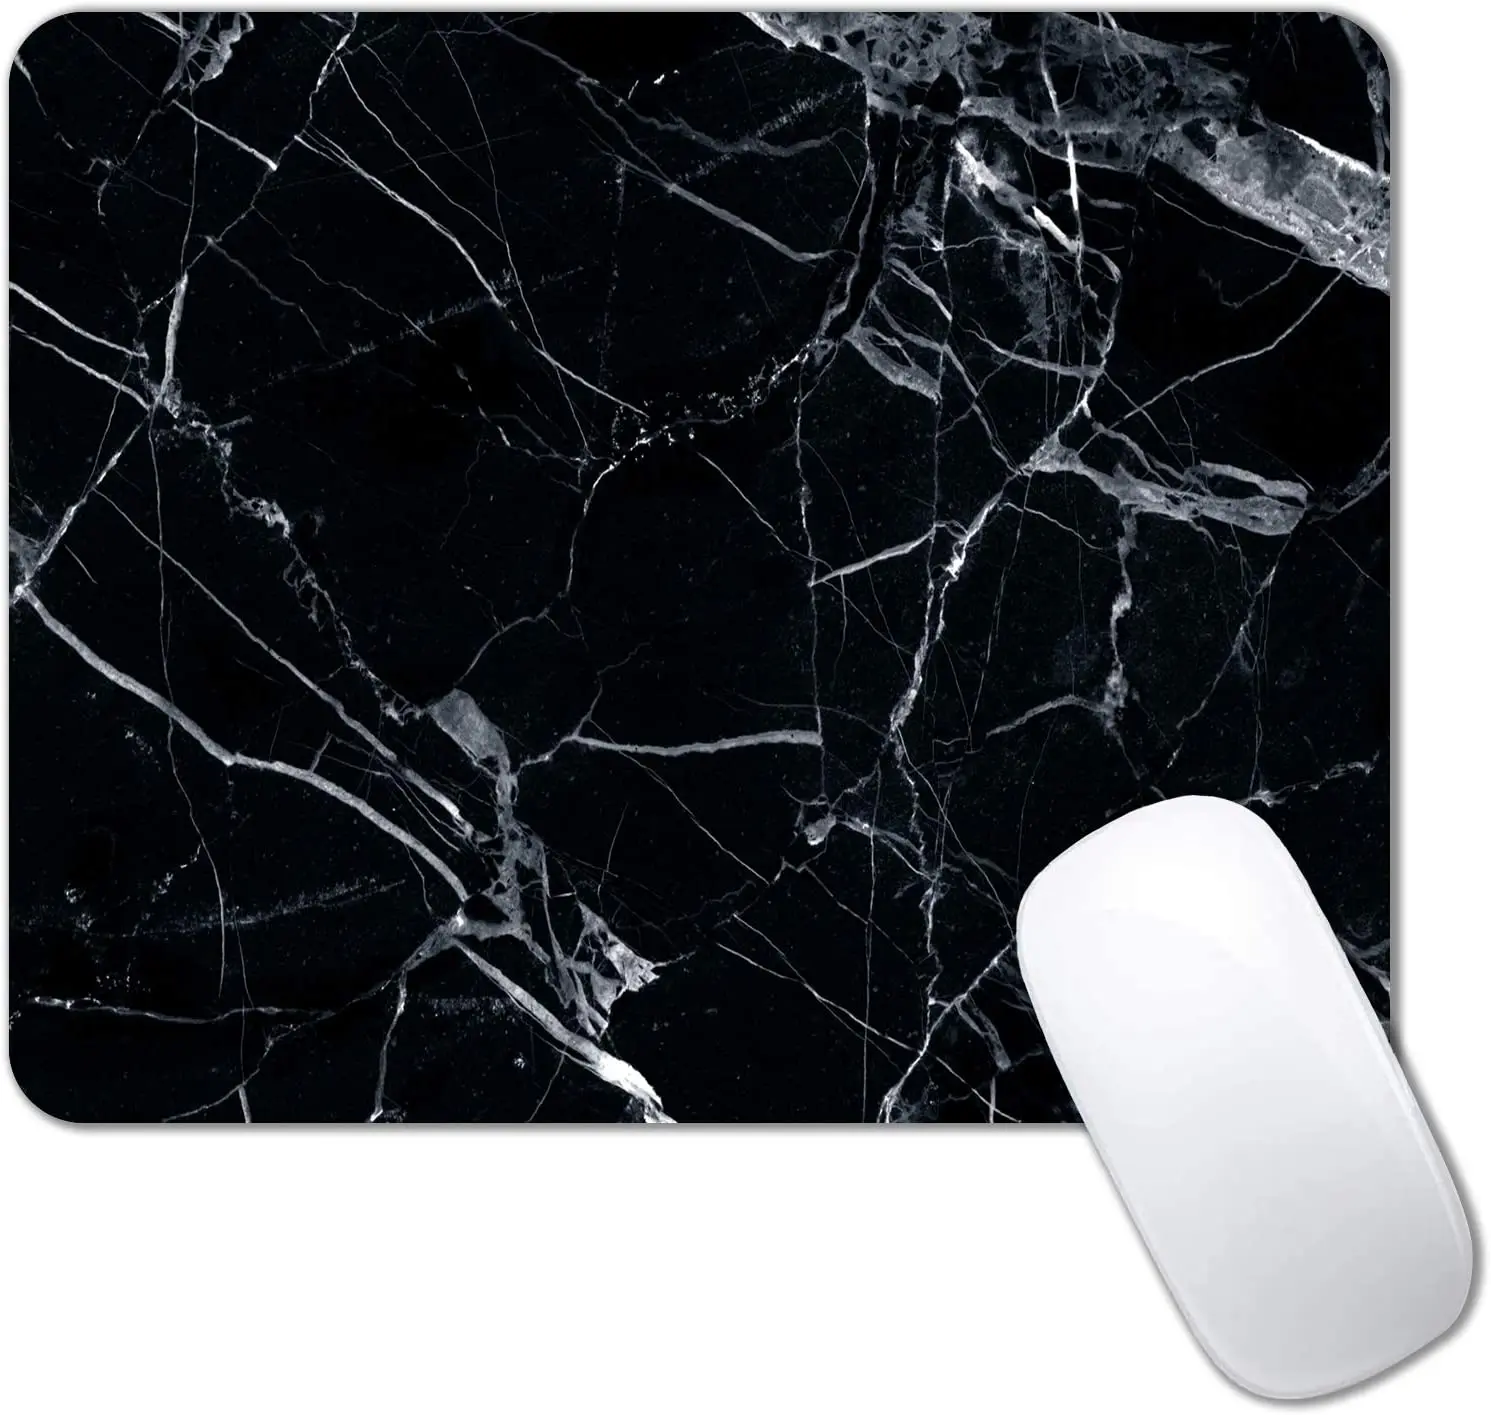 Rectangle Mouse Pad Black Marbling Mouse Pads for Office Laptop Gaming Computer Custom Designs Waterproof Non-Slip Rubber Base